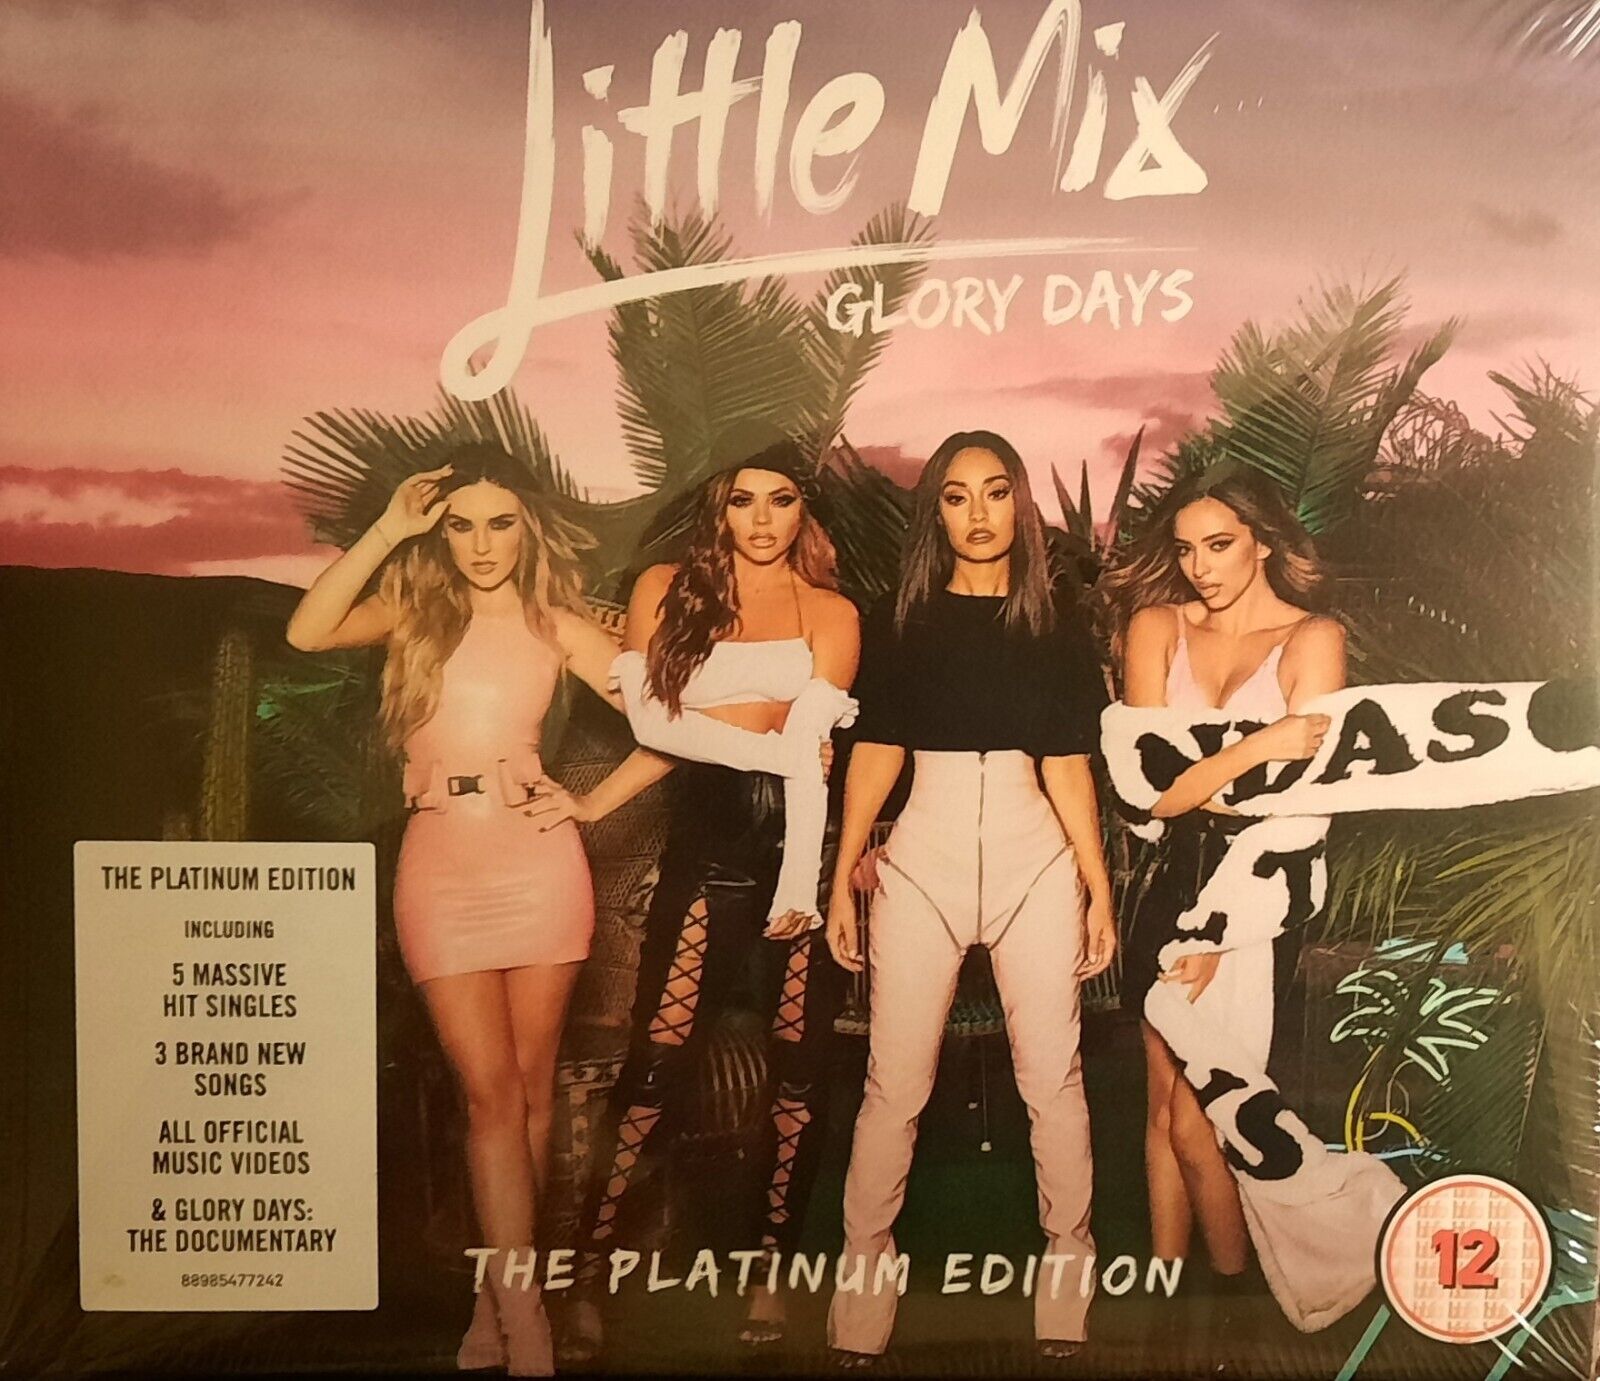 Little Mix-Glory Days-The Platinum Edition CD/DVD Digipack 2017 Brand New Sealed